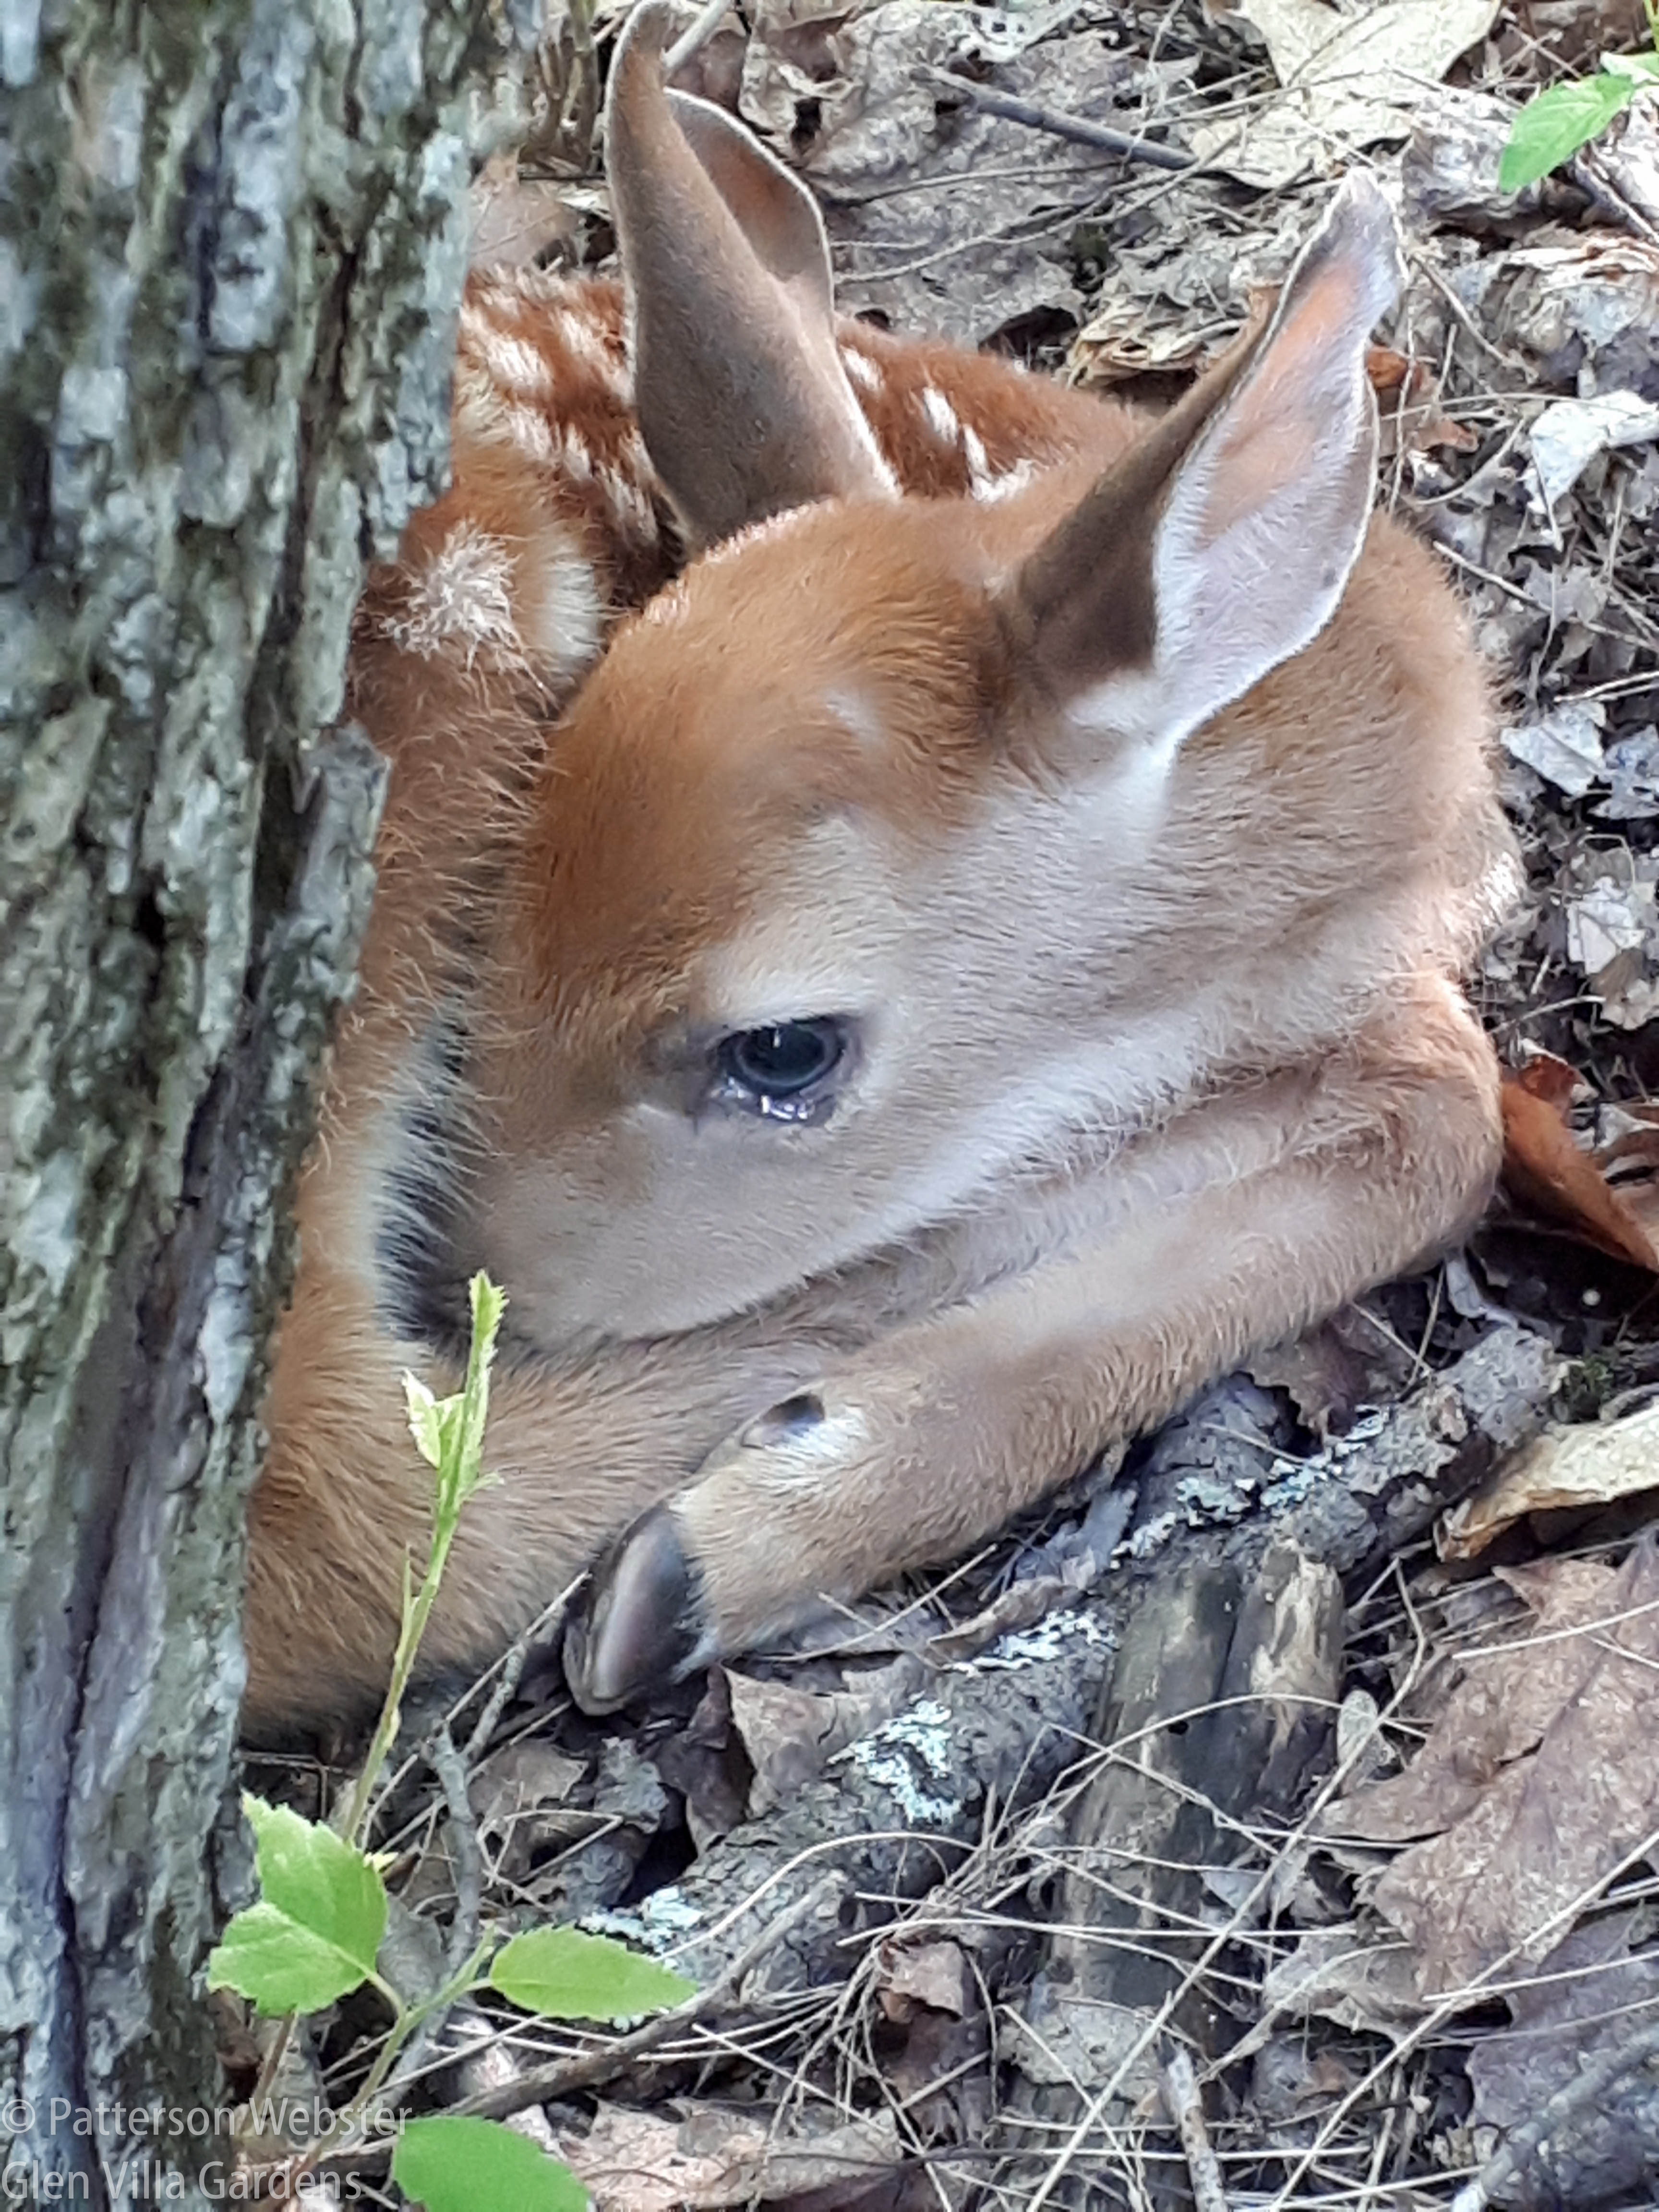 My son and grandson spotted this fawn very shortly after the baby was born.